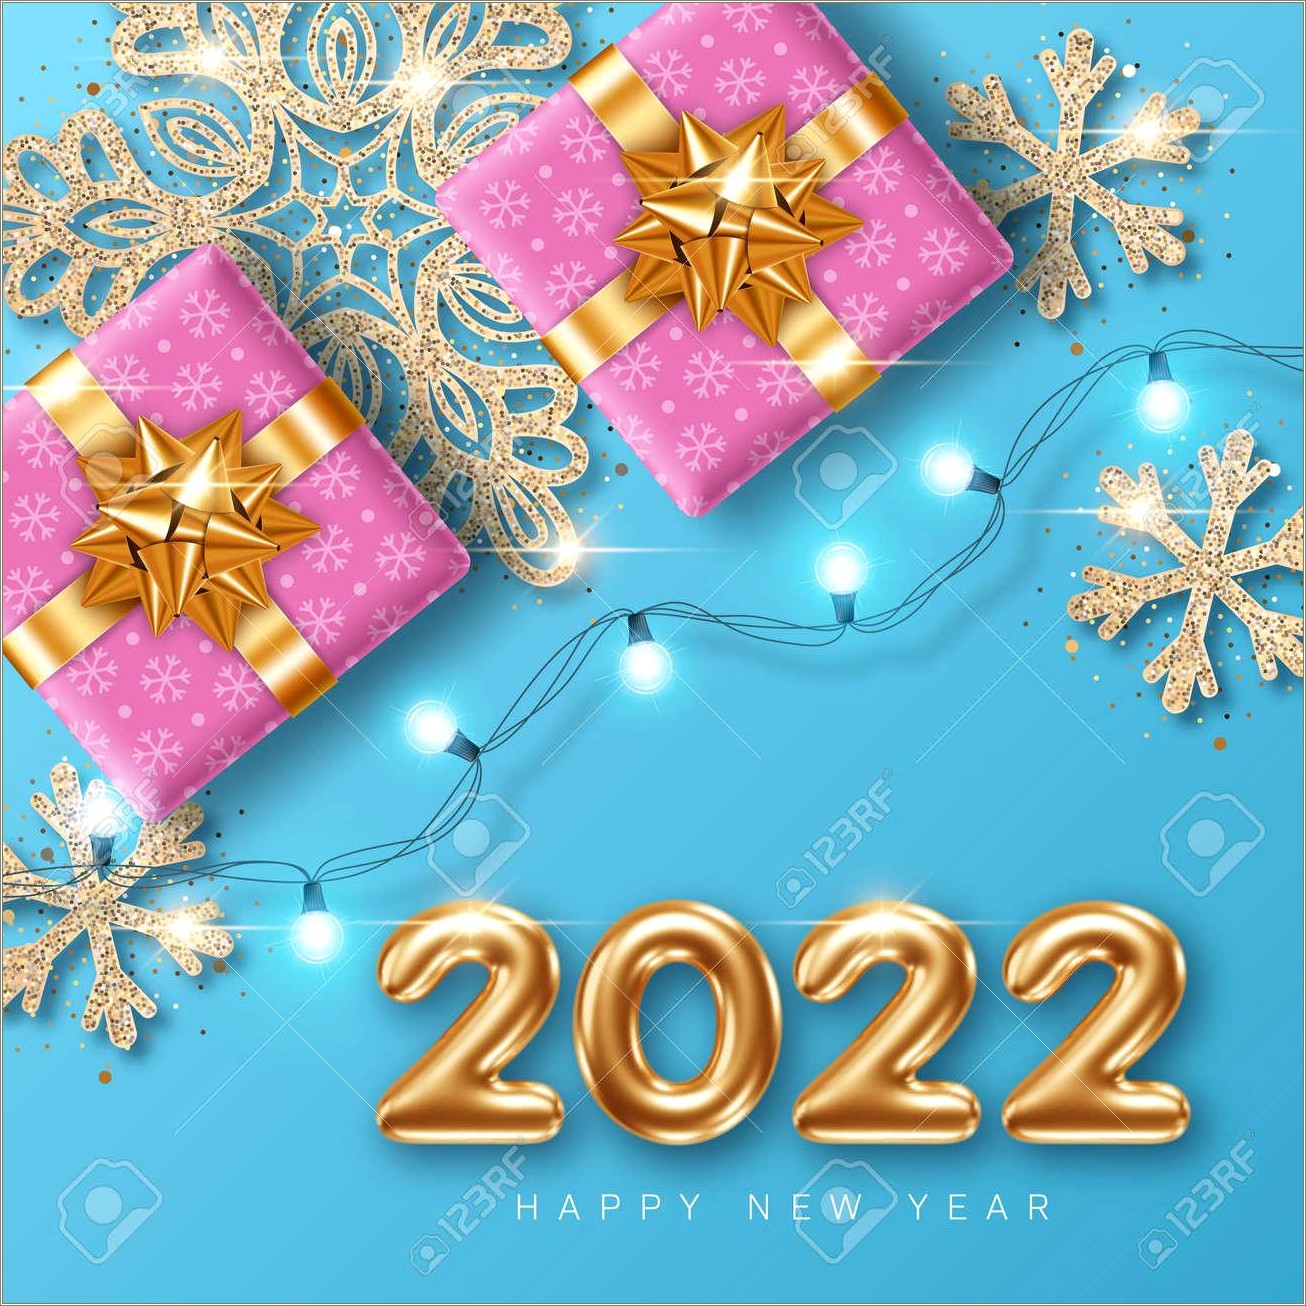 Free Happy New Year Photo Cards Template